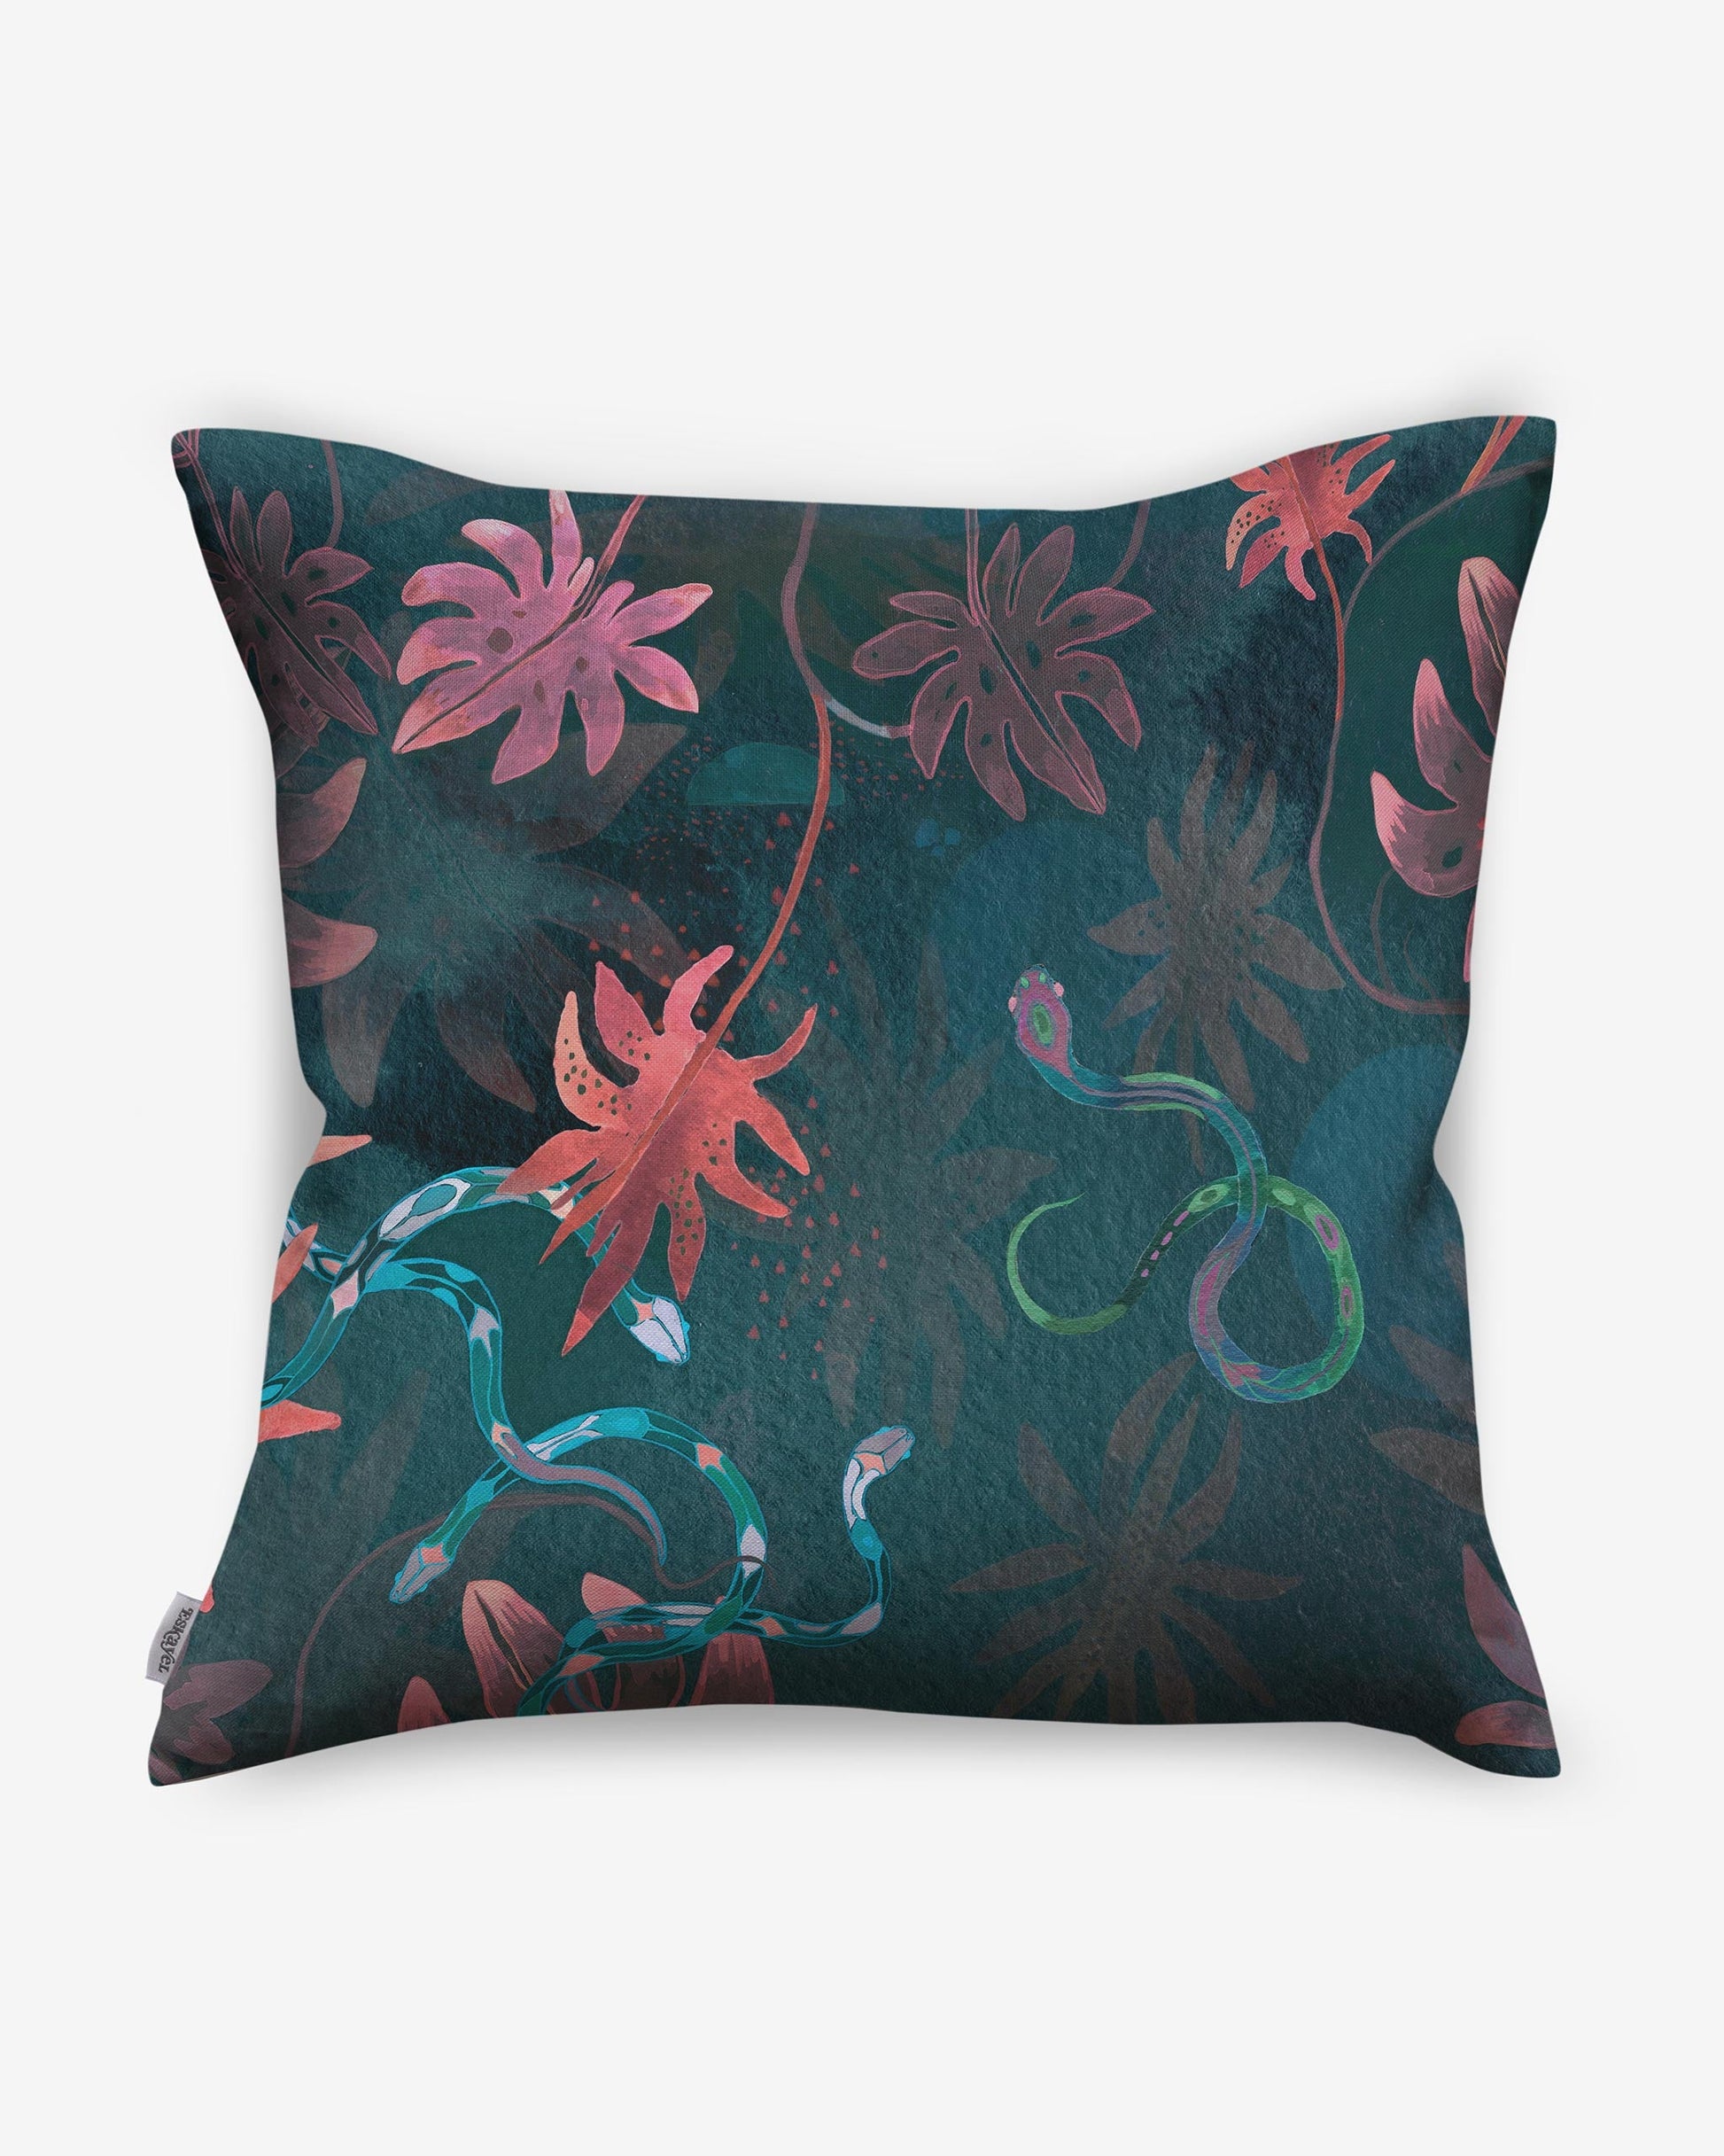 A Beryl pillow with an Eskayel collaboration of an Edera-inspired chinoiserie-inspired pattern